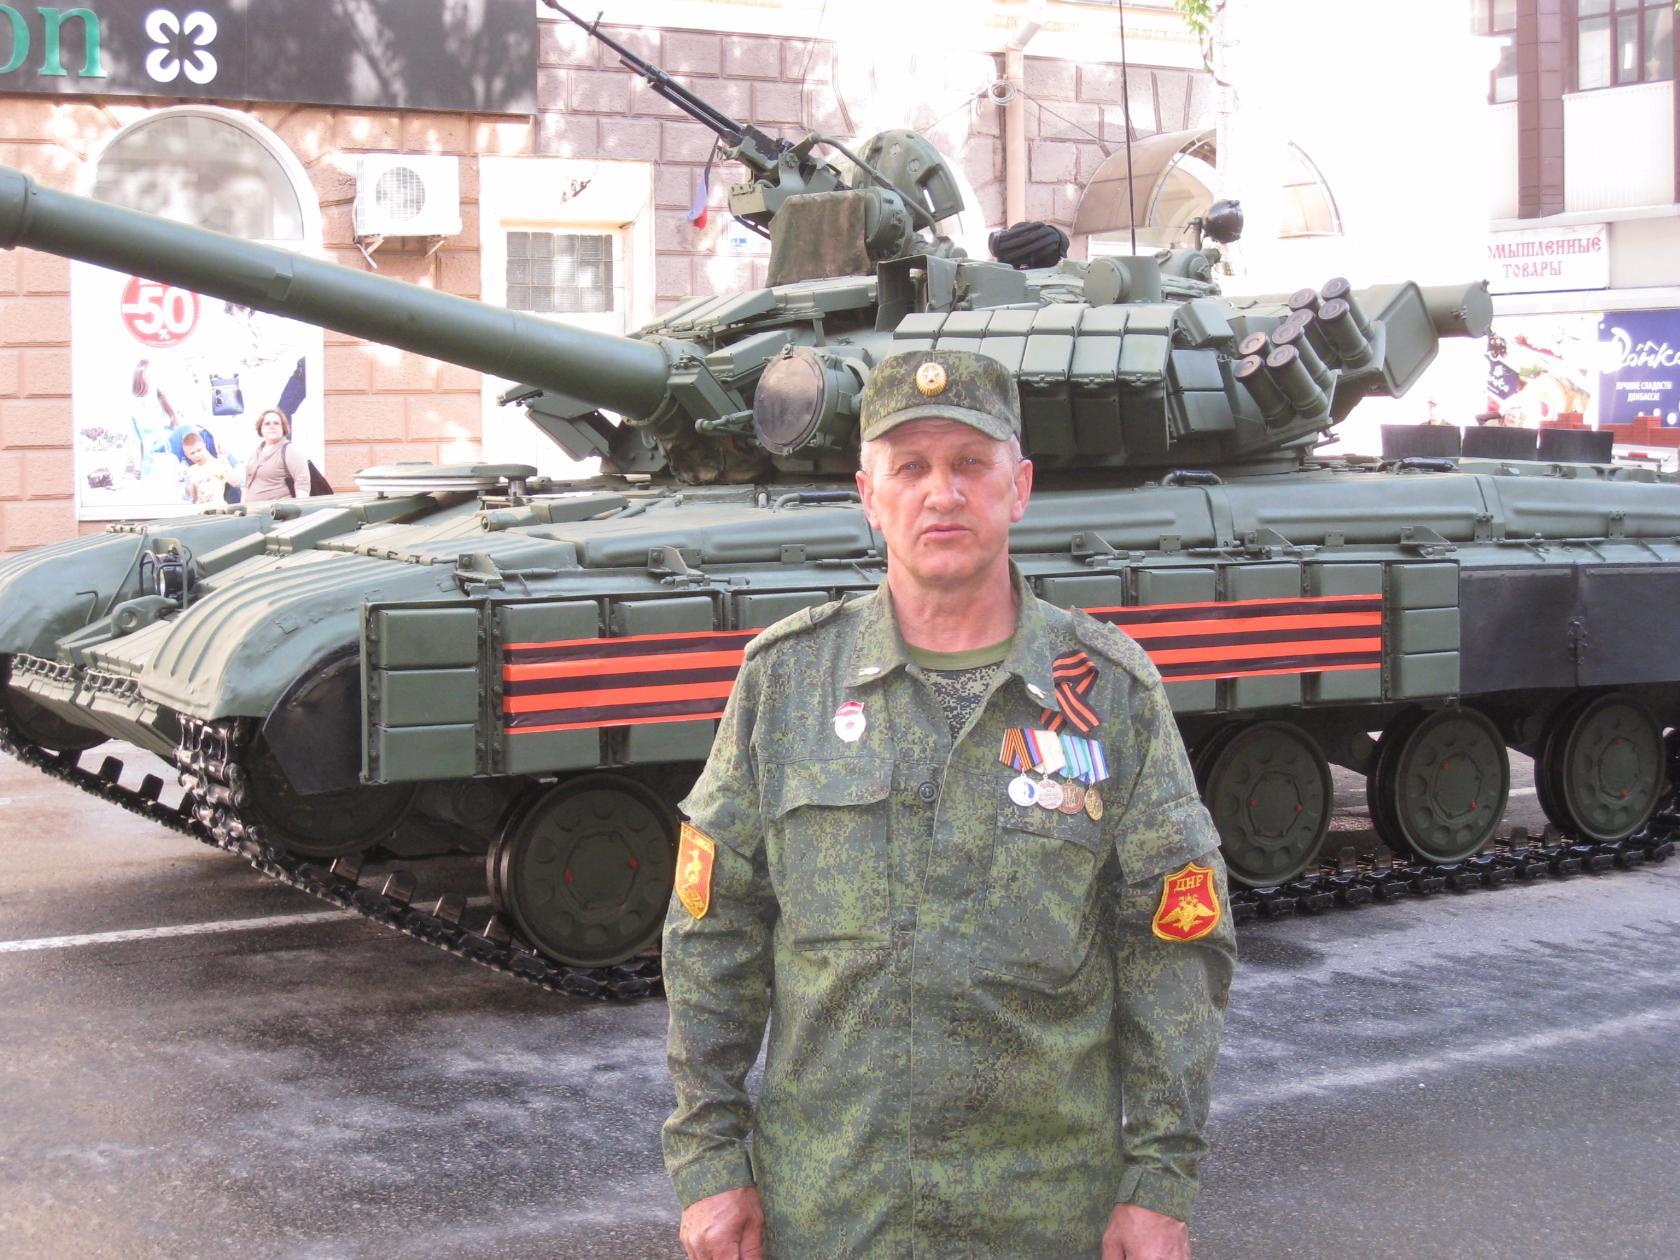 The commander of the "DPR" tank was sentenced to 10 years in absentia